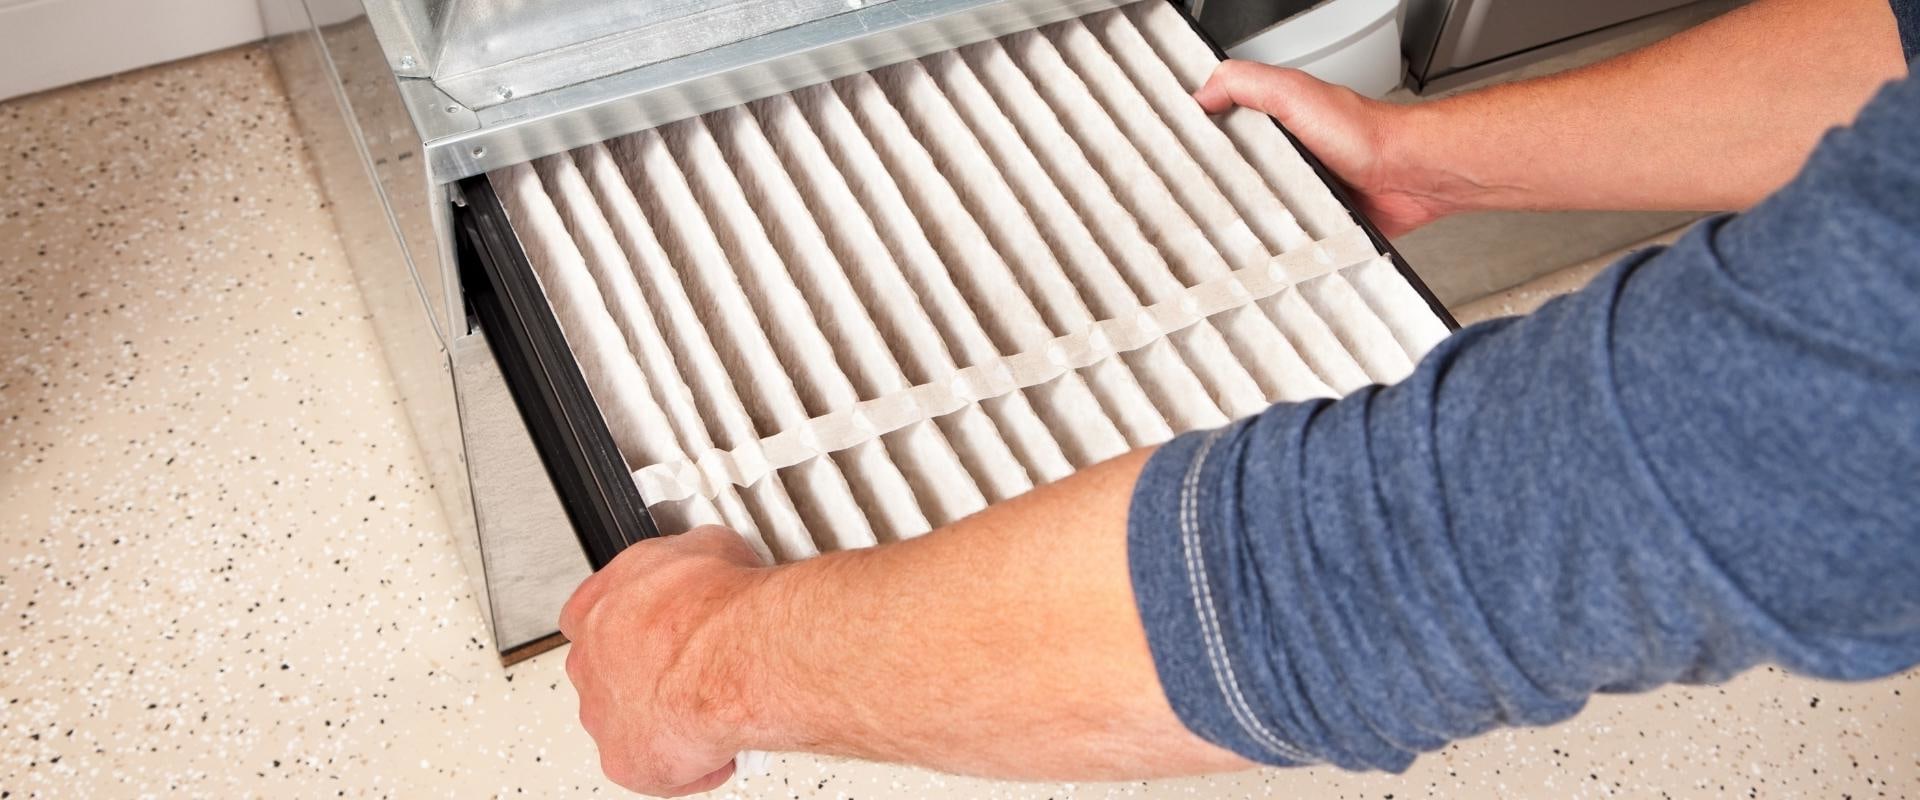 How to Easily Find the Air Filter for Your Home HVAC System